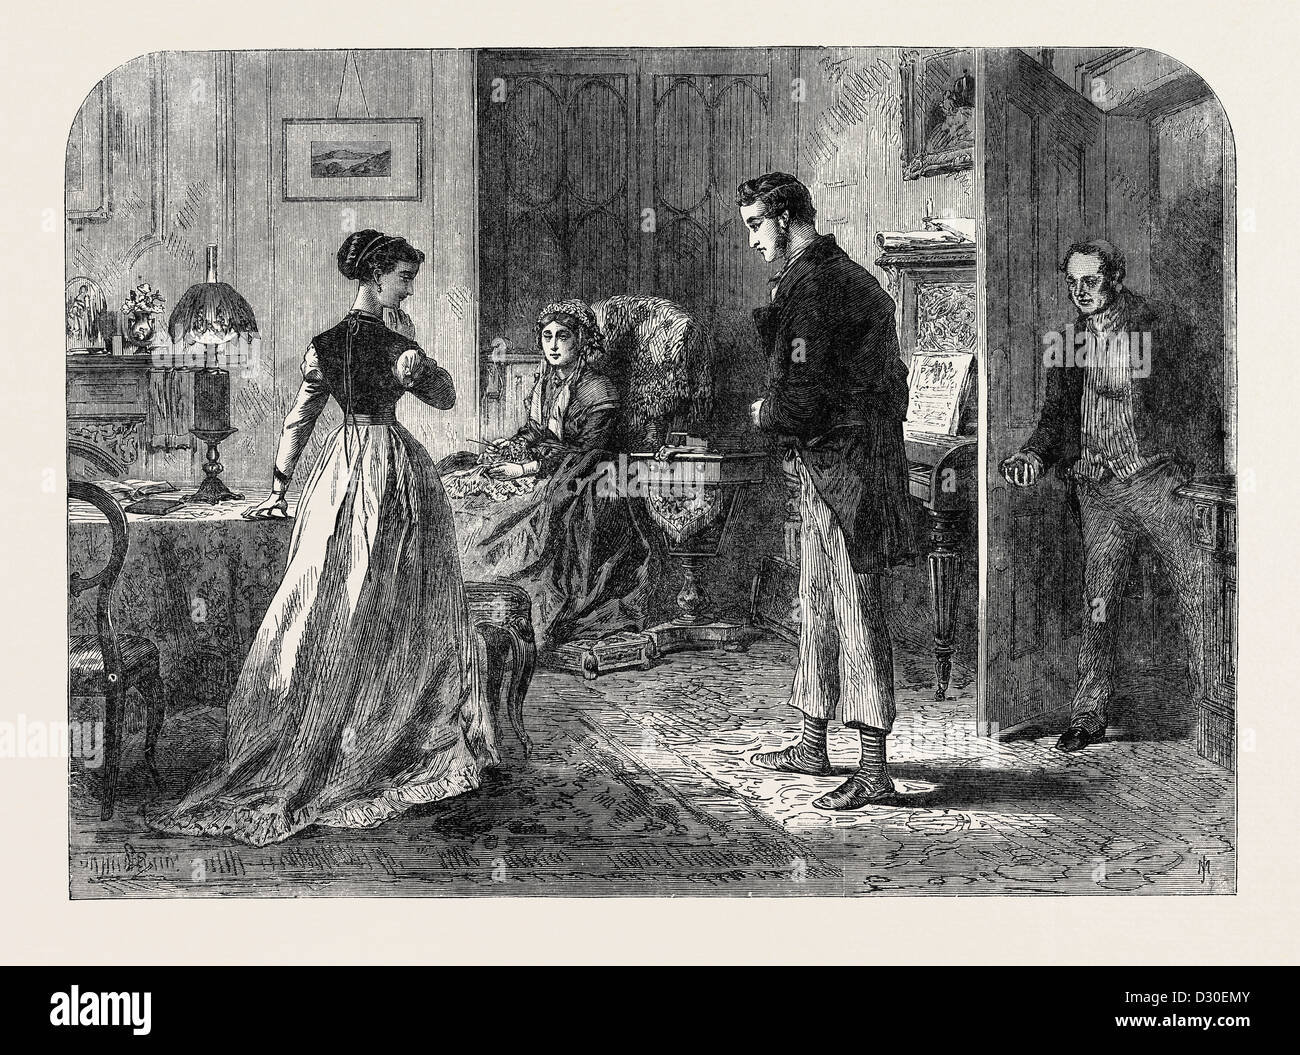 STEWART HUNT'S INTRODUCTION TO MISS JONES DRAWN BY A. HUNT 1867 Stock Photo